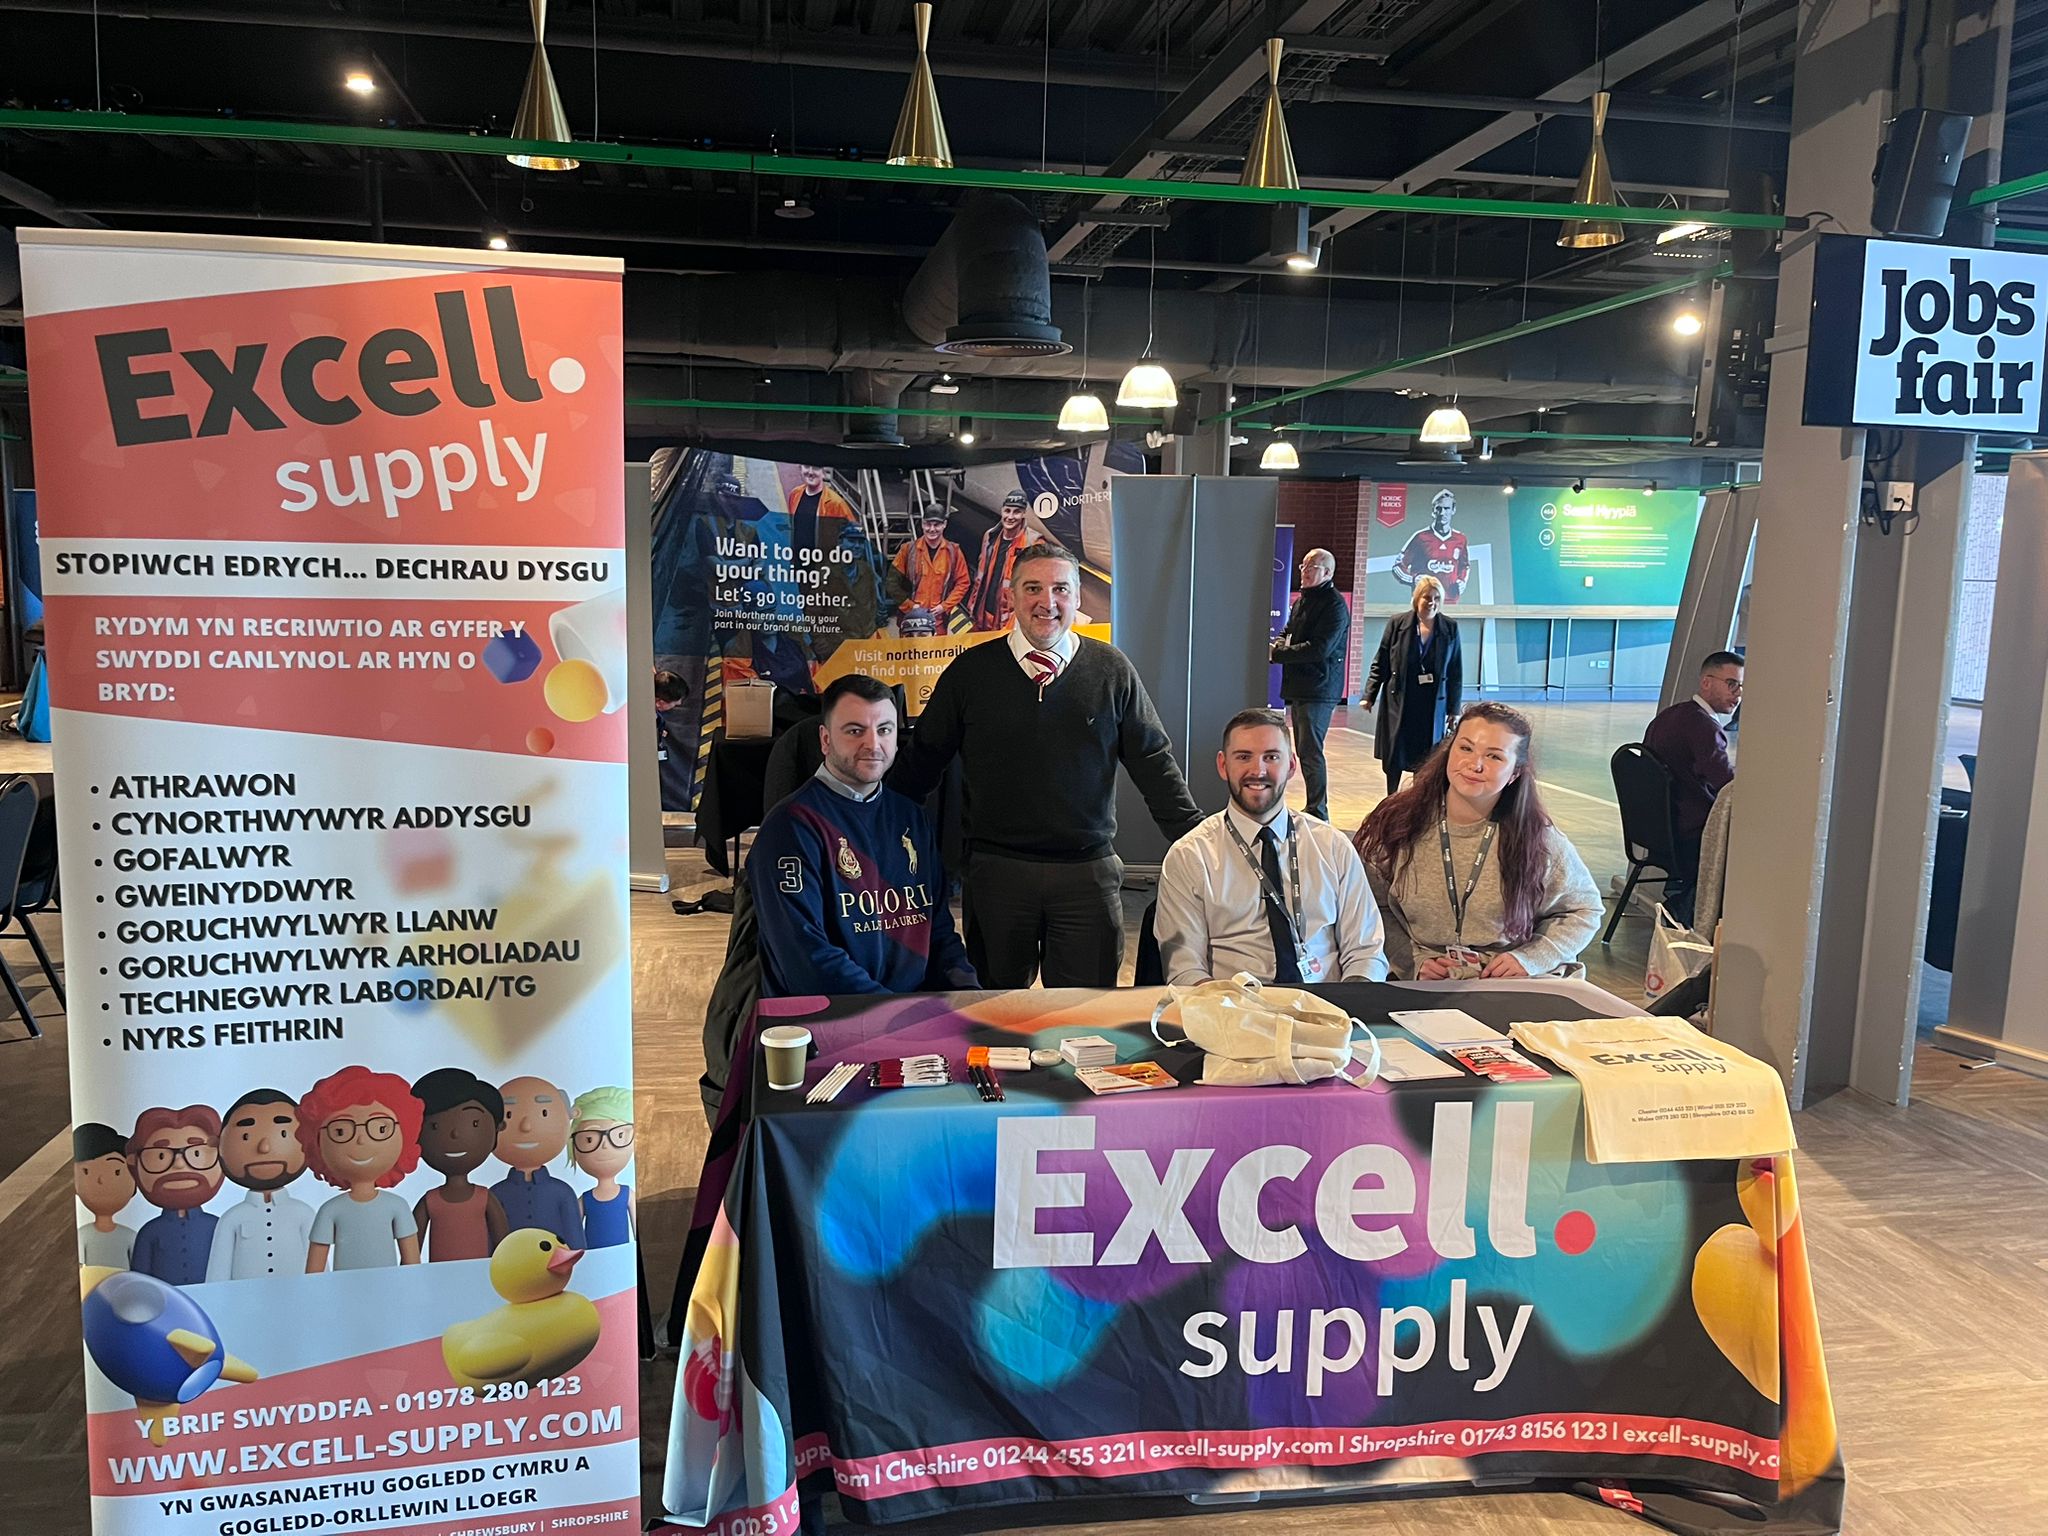 Excell Support at our event in Liverpool